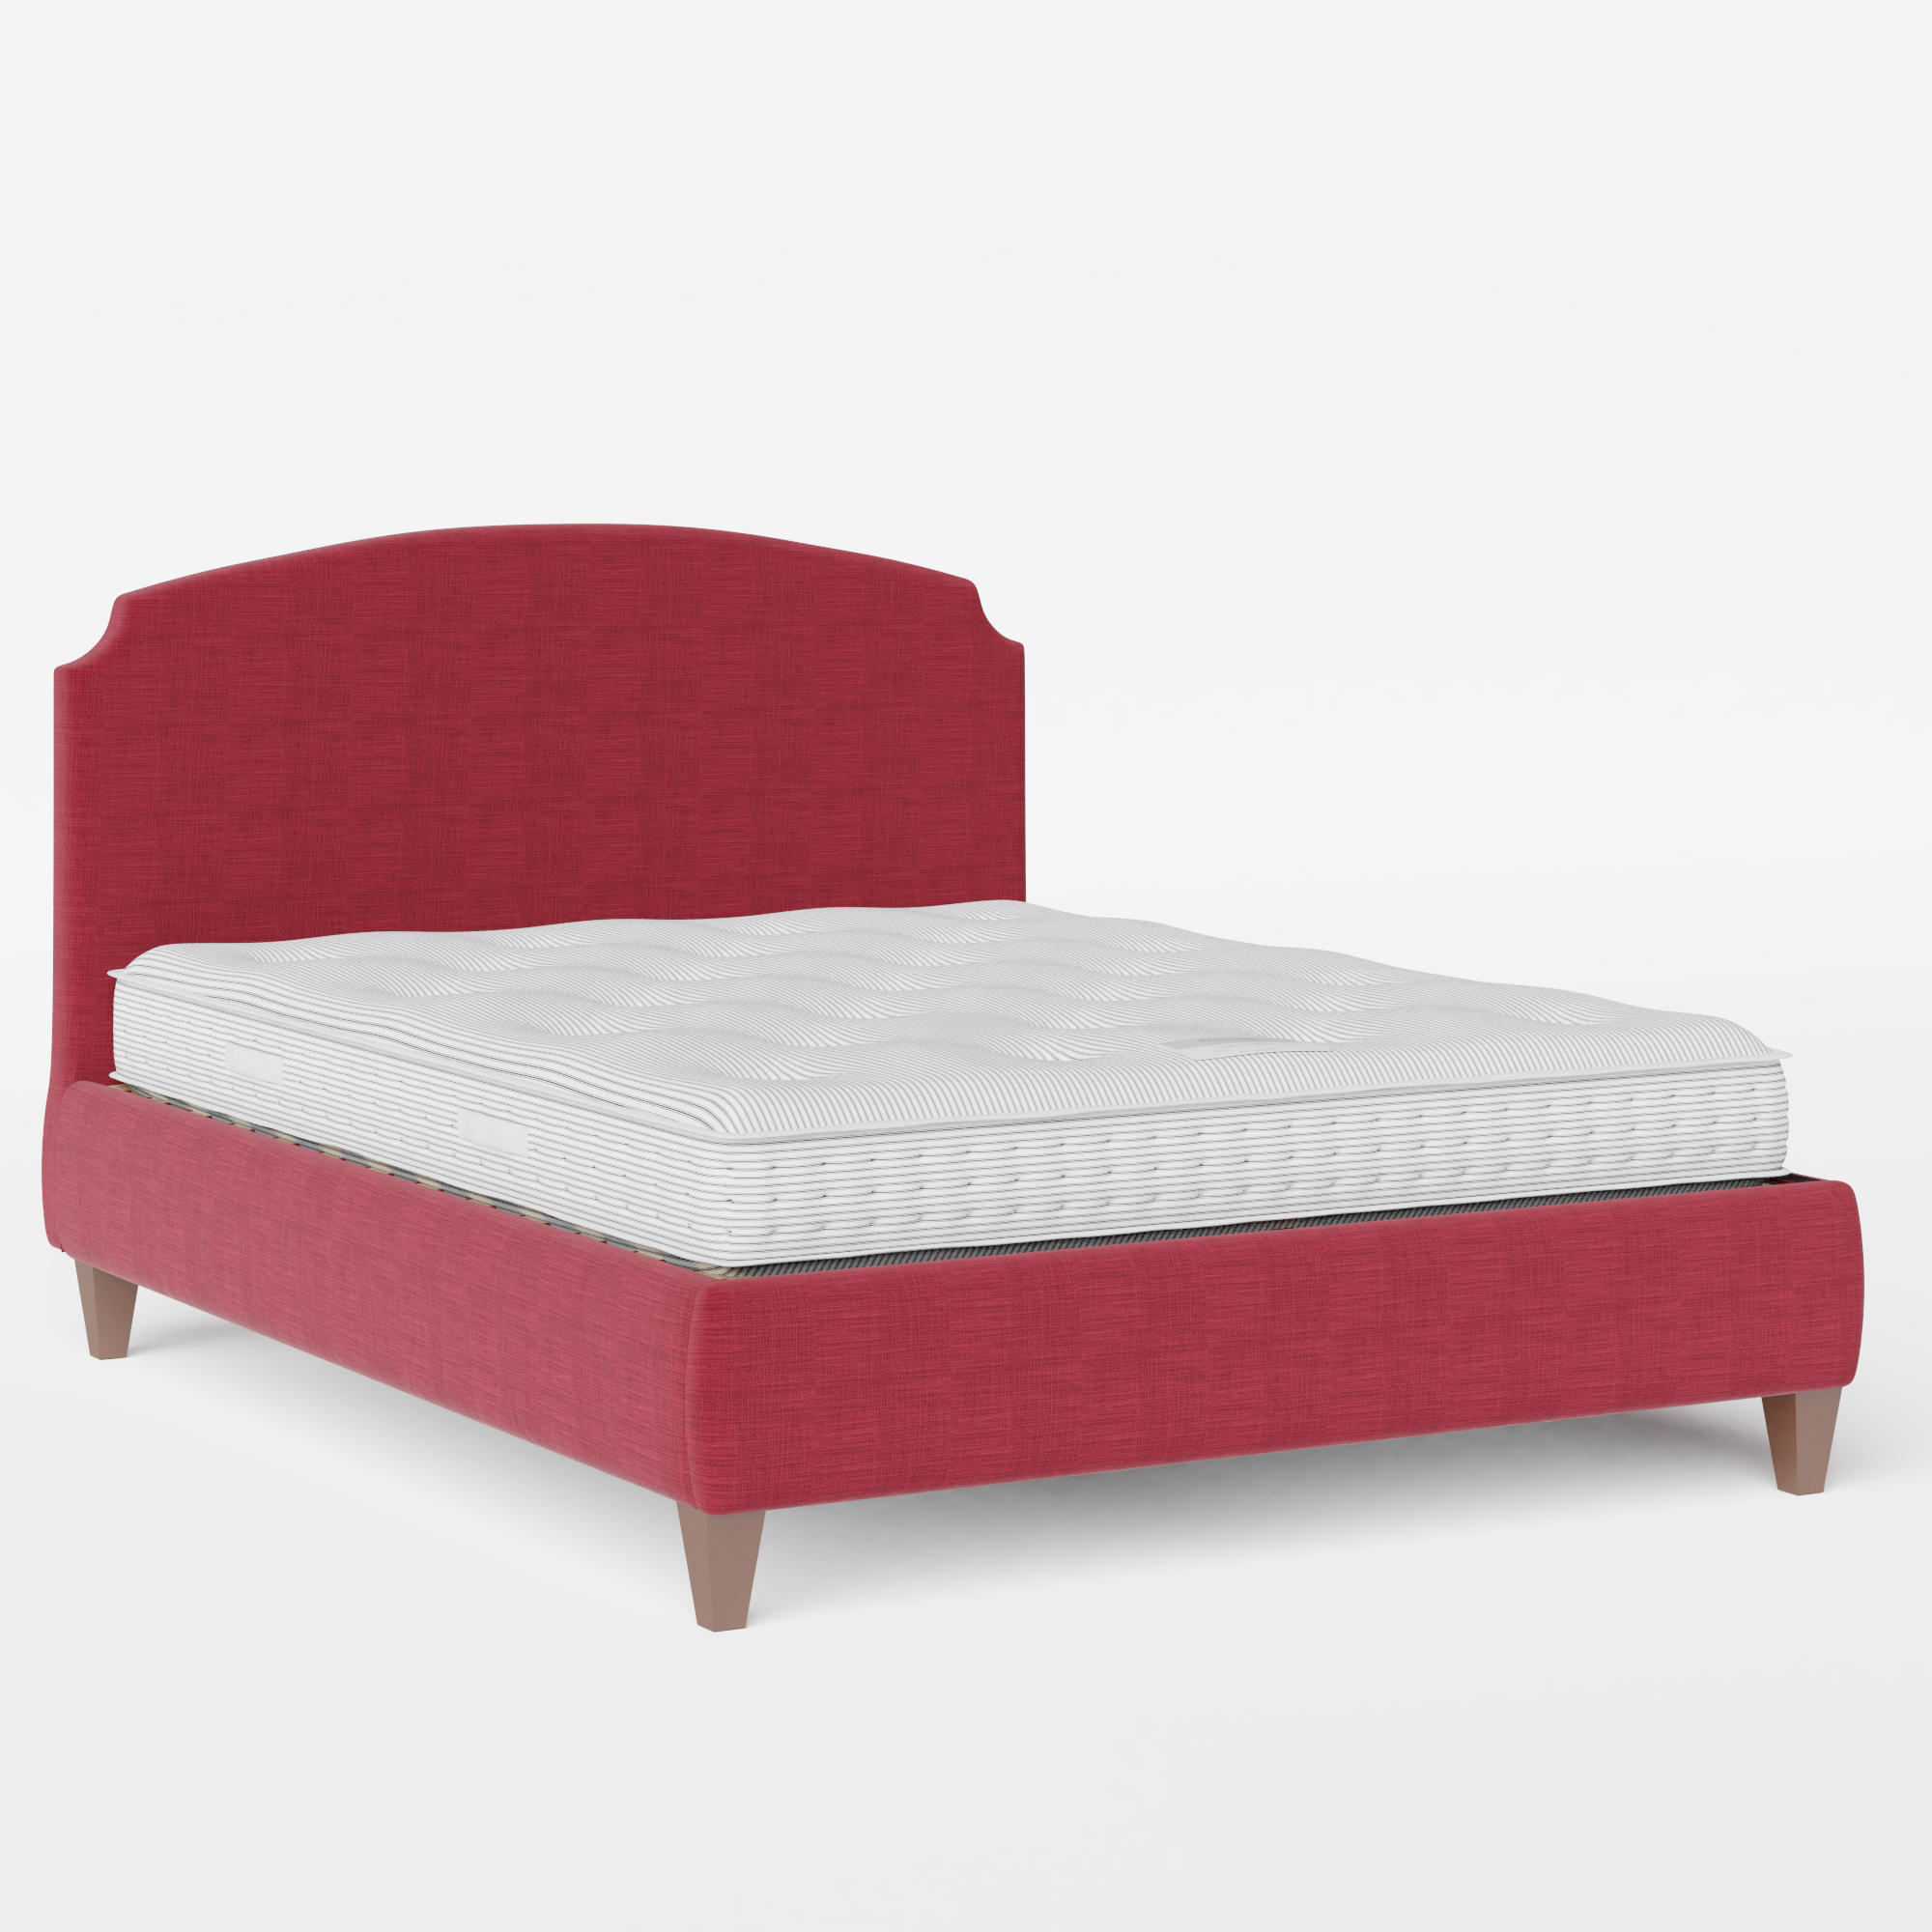 Lide upholstered bed in cherry fabric